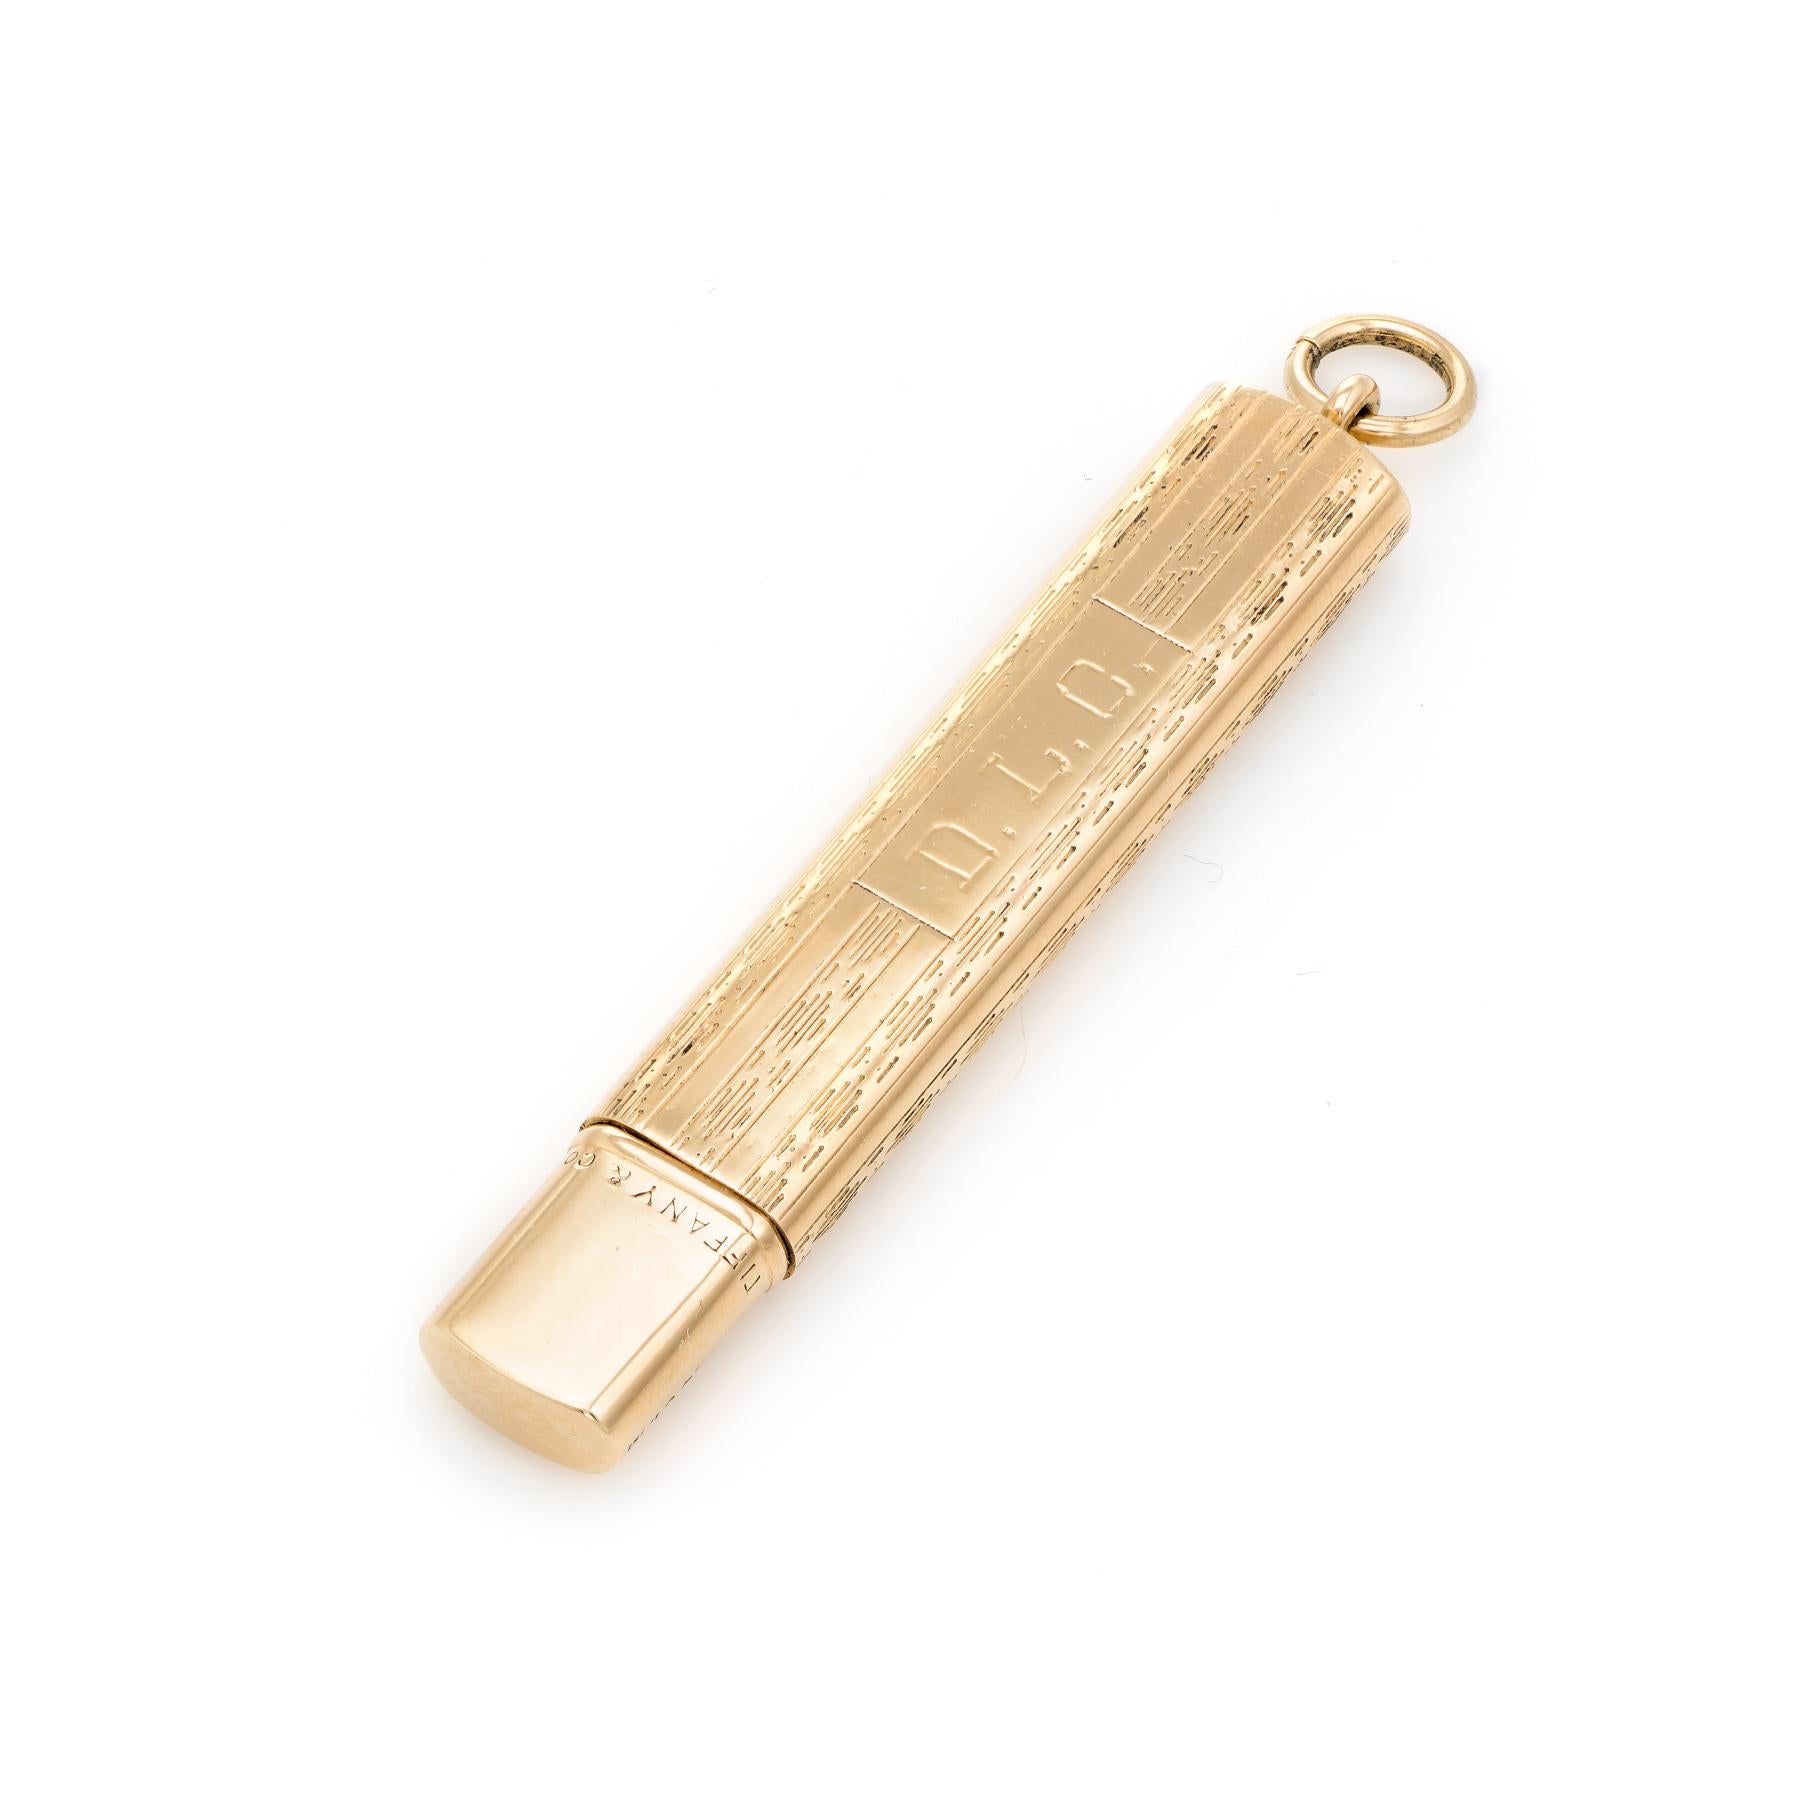 Unique Tiffany & Co pendant or charm, crafted in 14 karat yellow gold.  

The outer case features a textured pattern with a cartouche engraved with the initials 